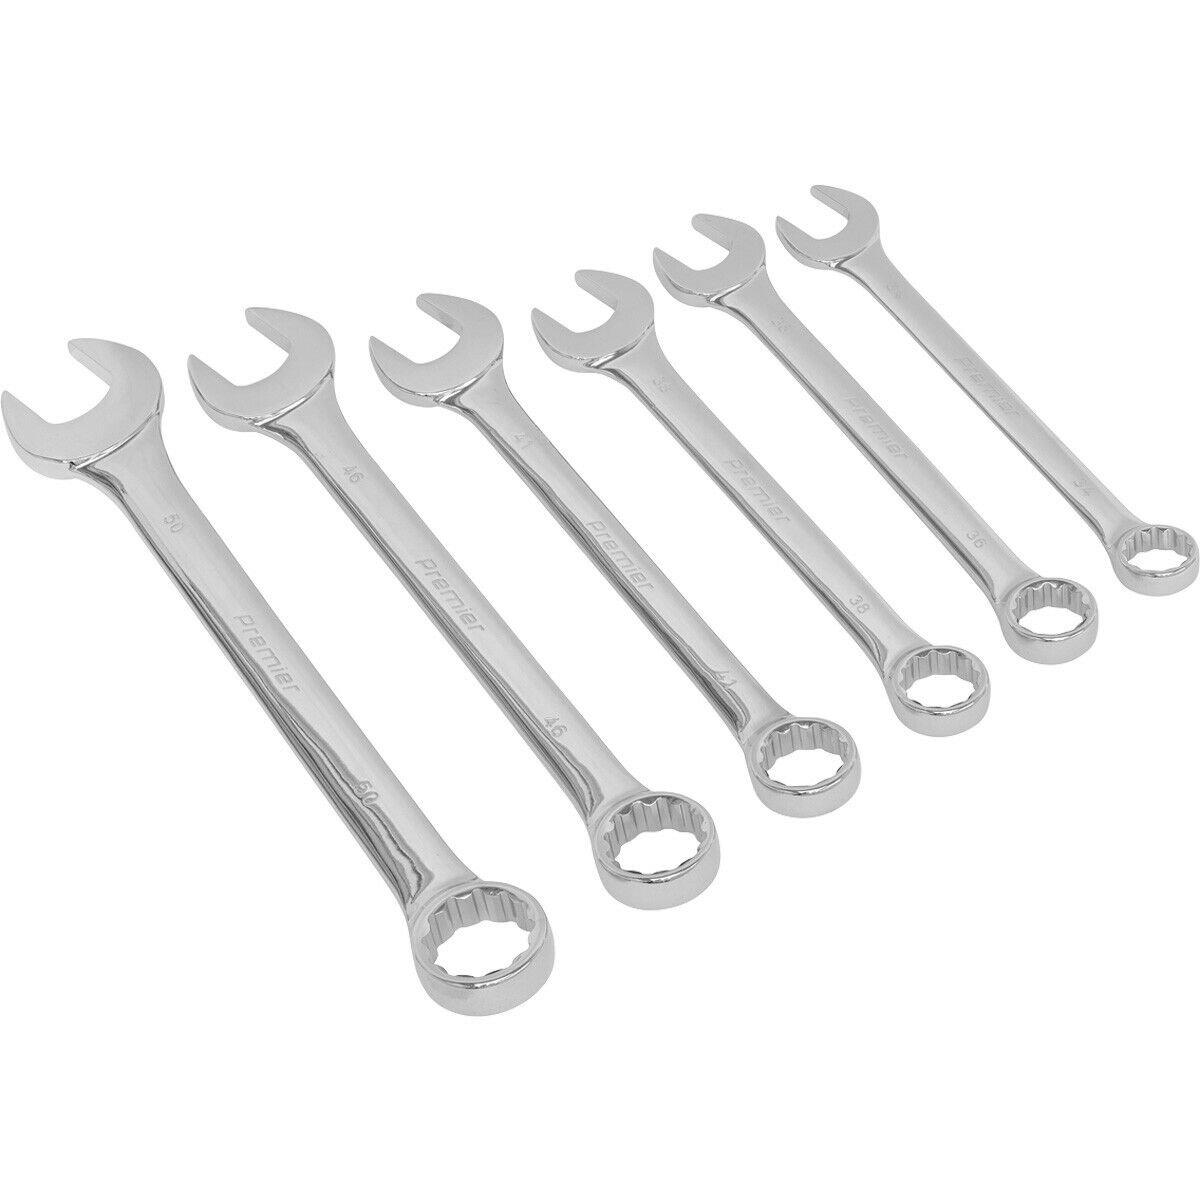 6pc EXTRA LARGE Combination Spanner Set - 34mm to 50mm 12 Point Nut Ring Wrench